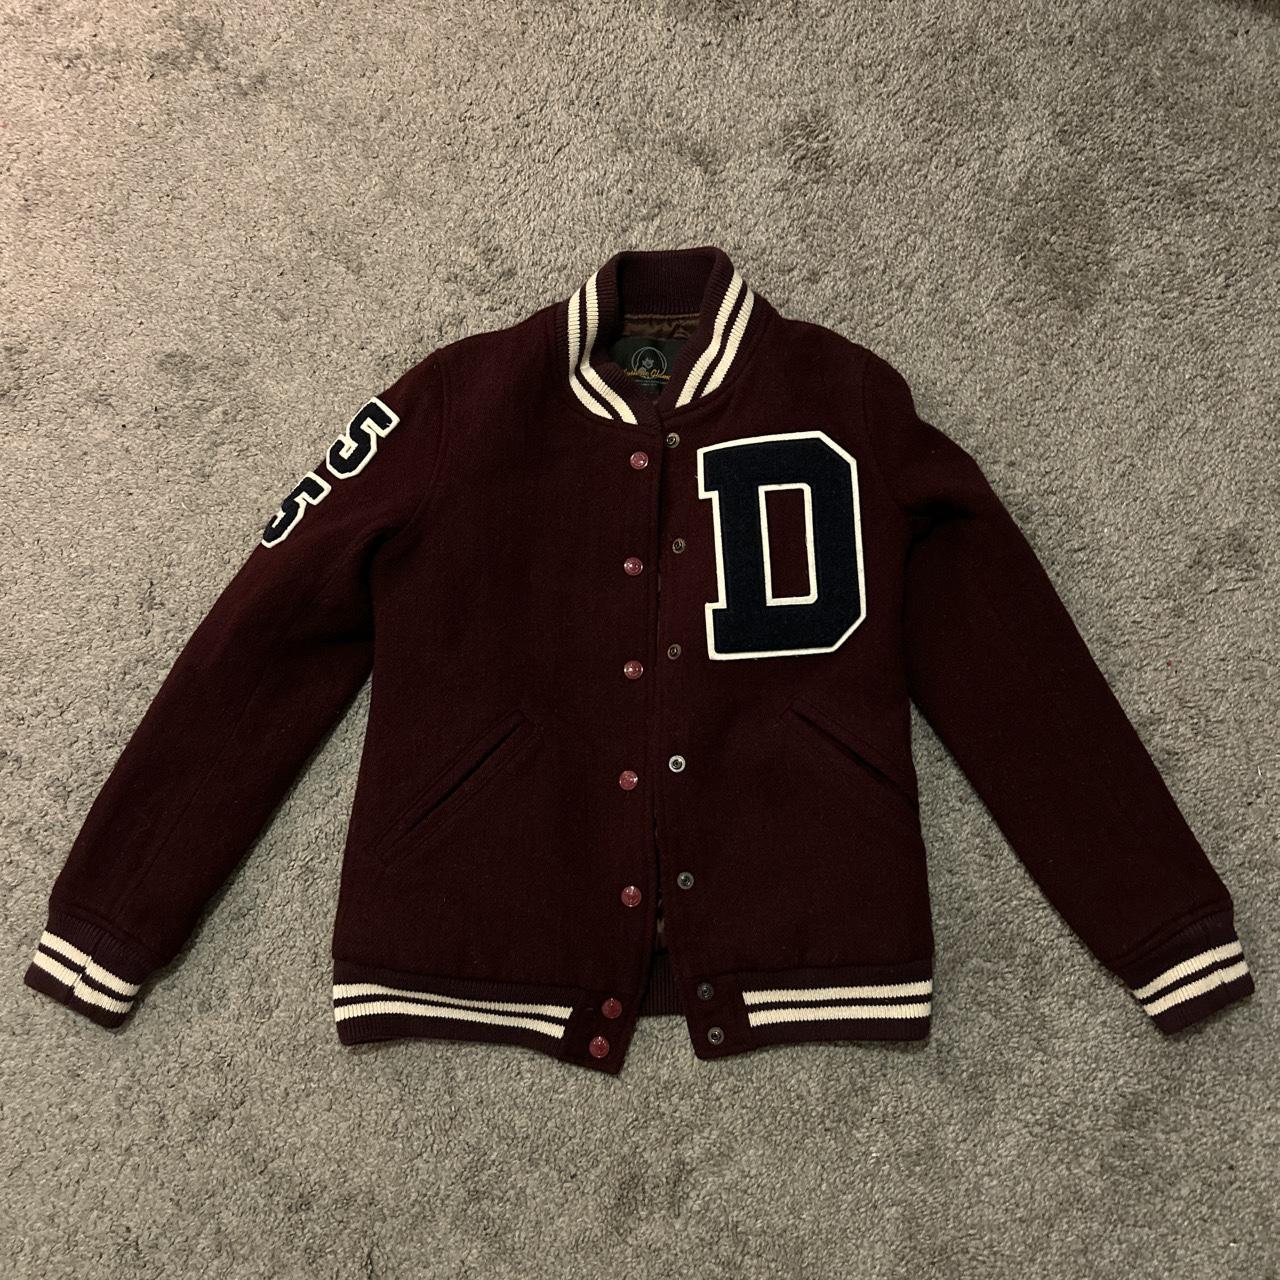 Hysteric glamour Detroit varsity jacket , Such a...